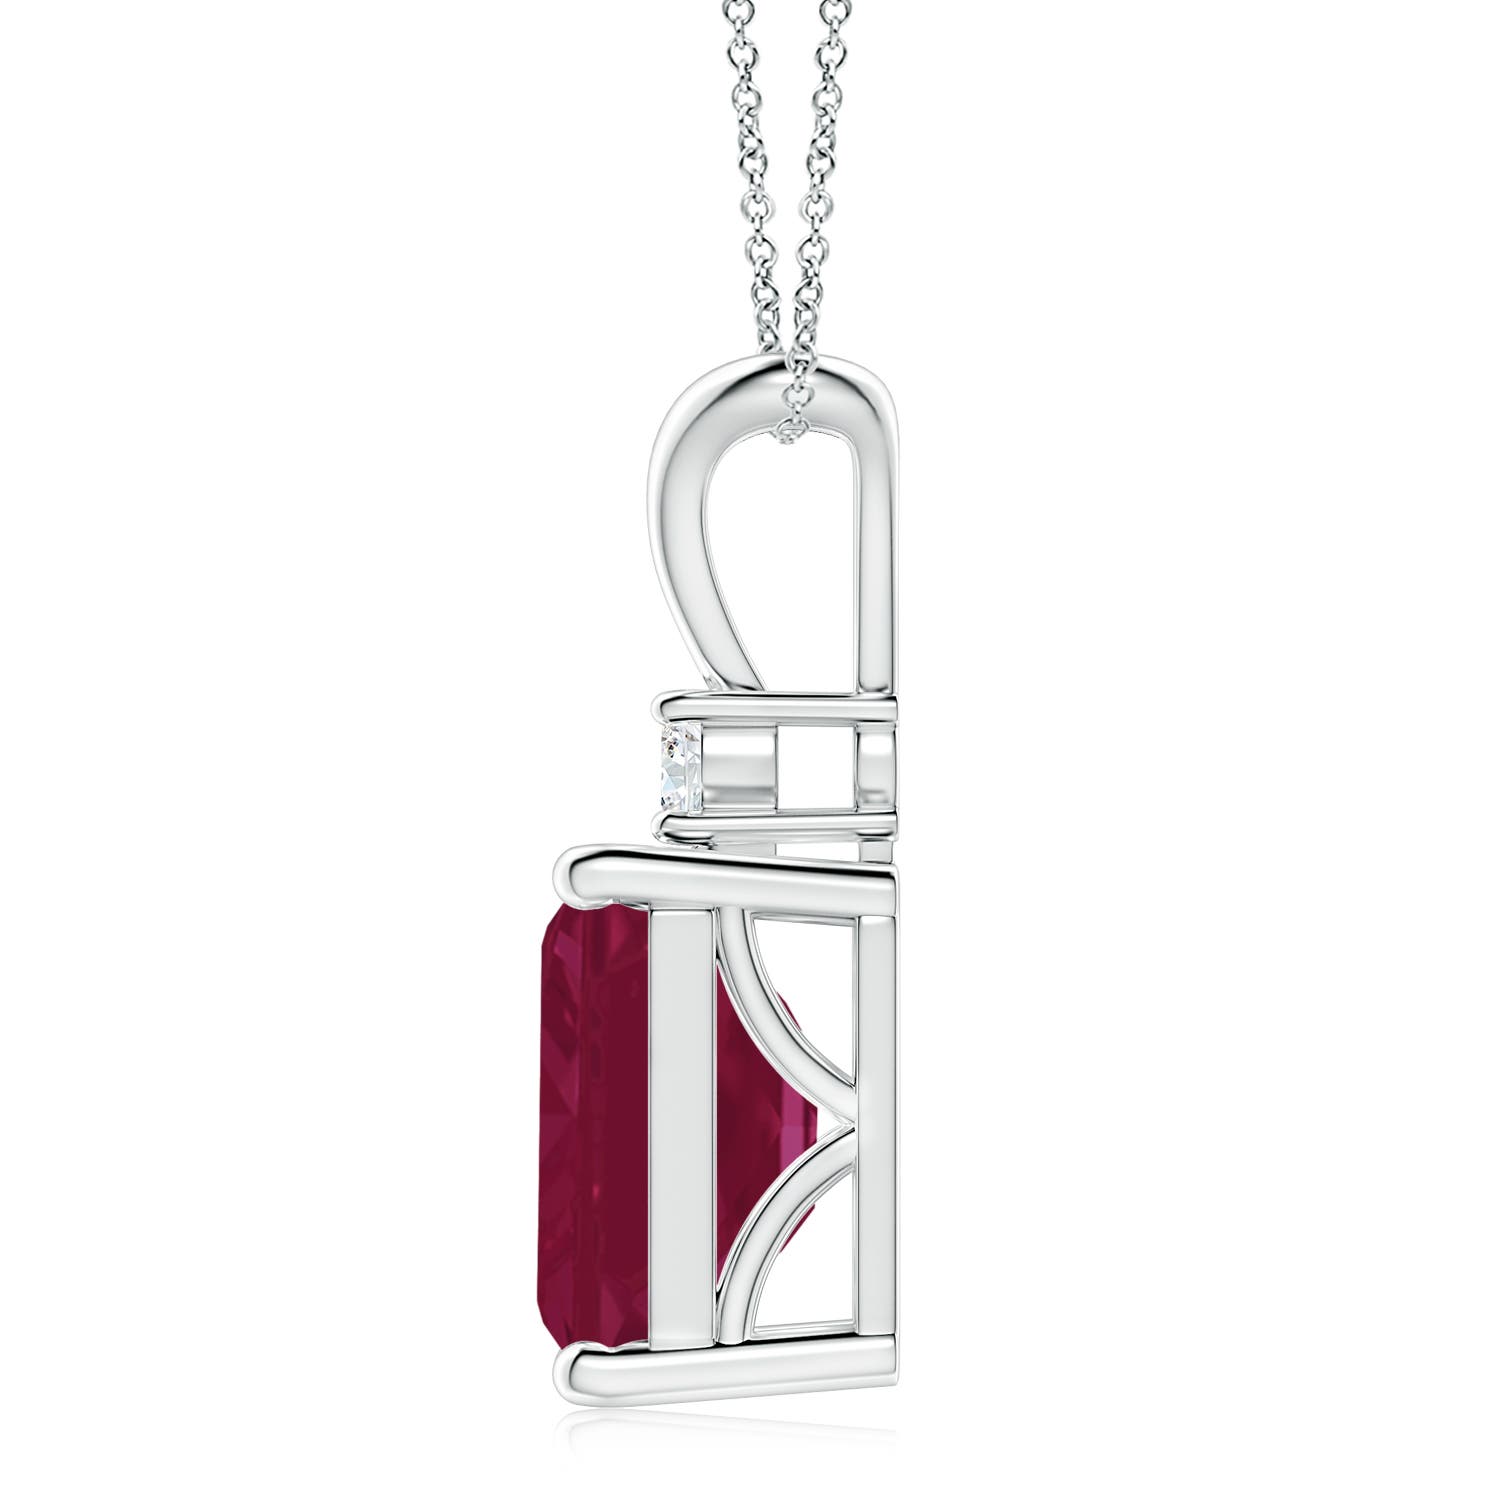 A - Ruby / 6.41 CT / 14 KT White Gold